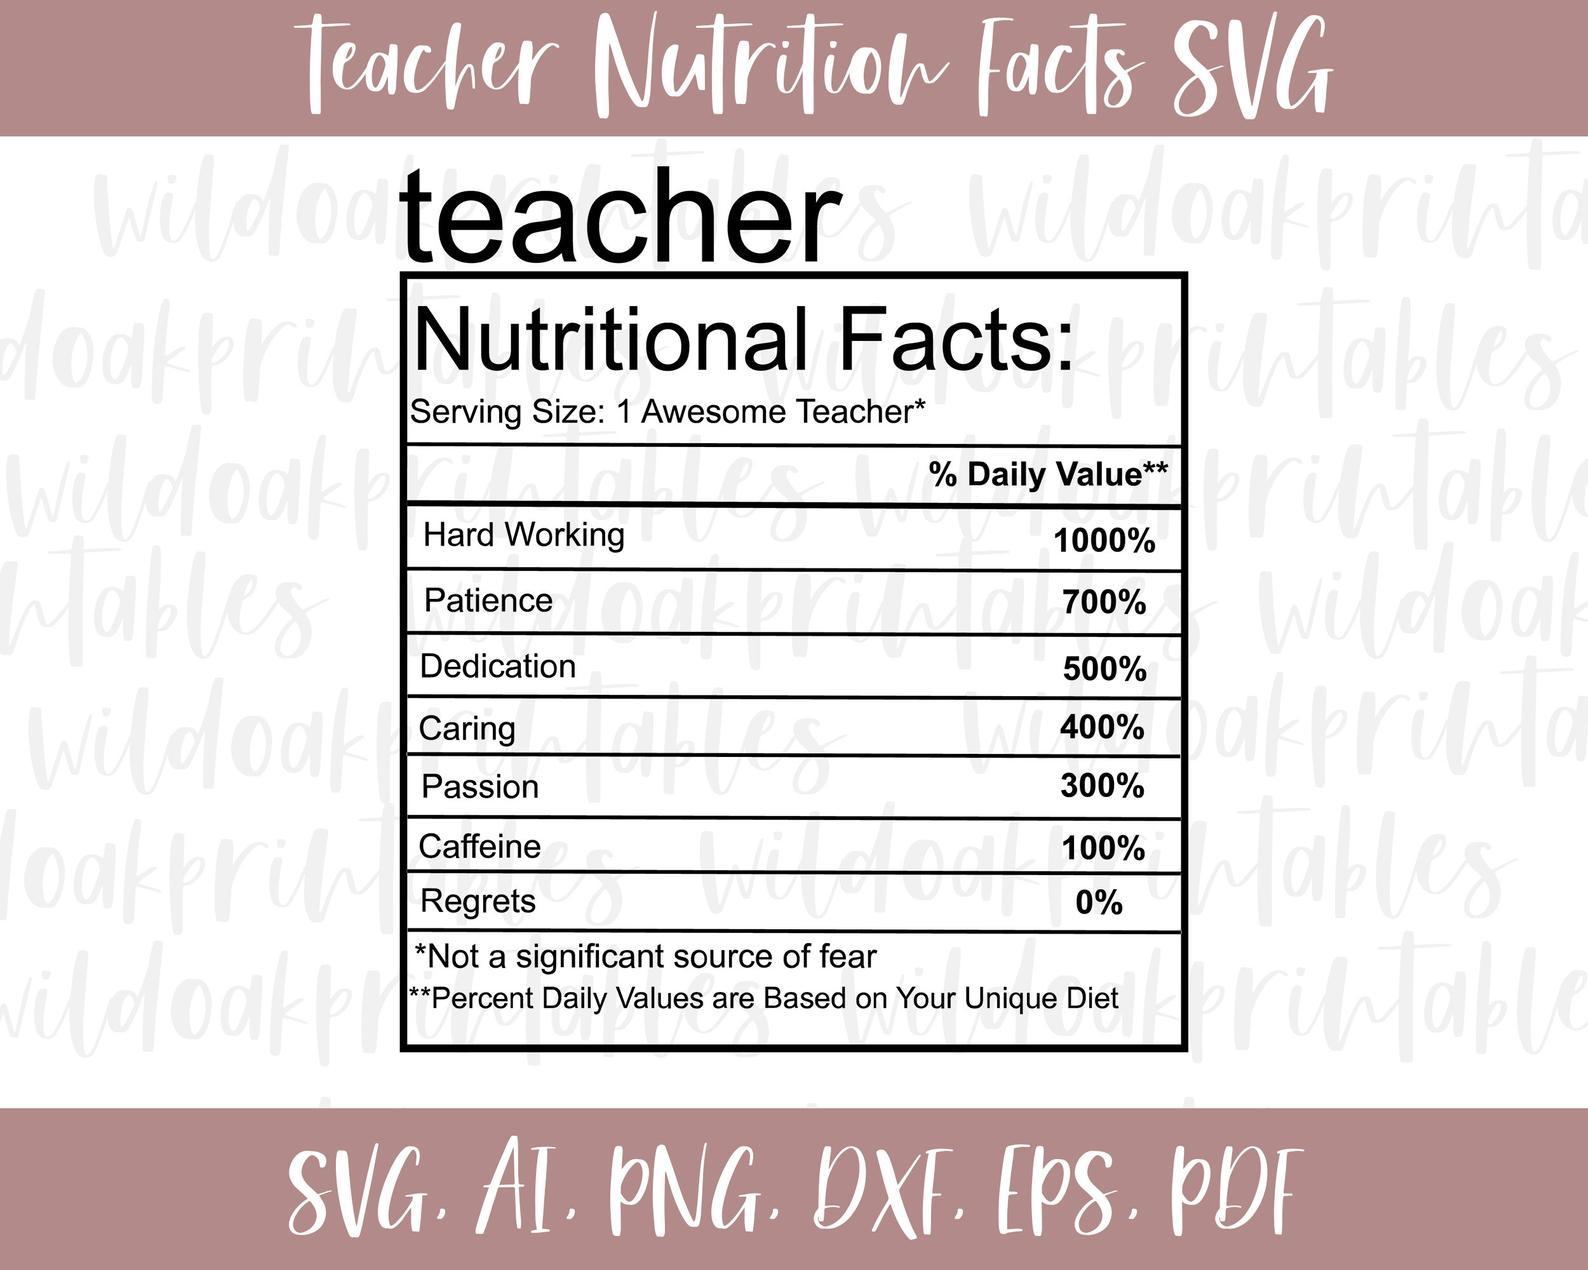 Download Teacher Nutrition Facts Svg Funny Teacher Svgs Funny Teacher Svg Teacher Nutrition Facts Label Svg Nutrition Facts Funny Labels Svg So Fontsy